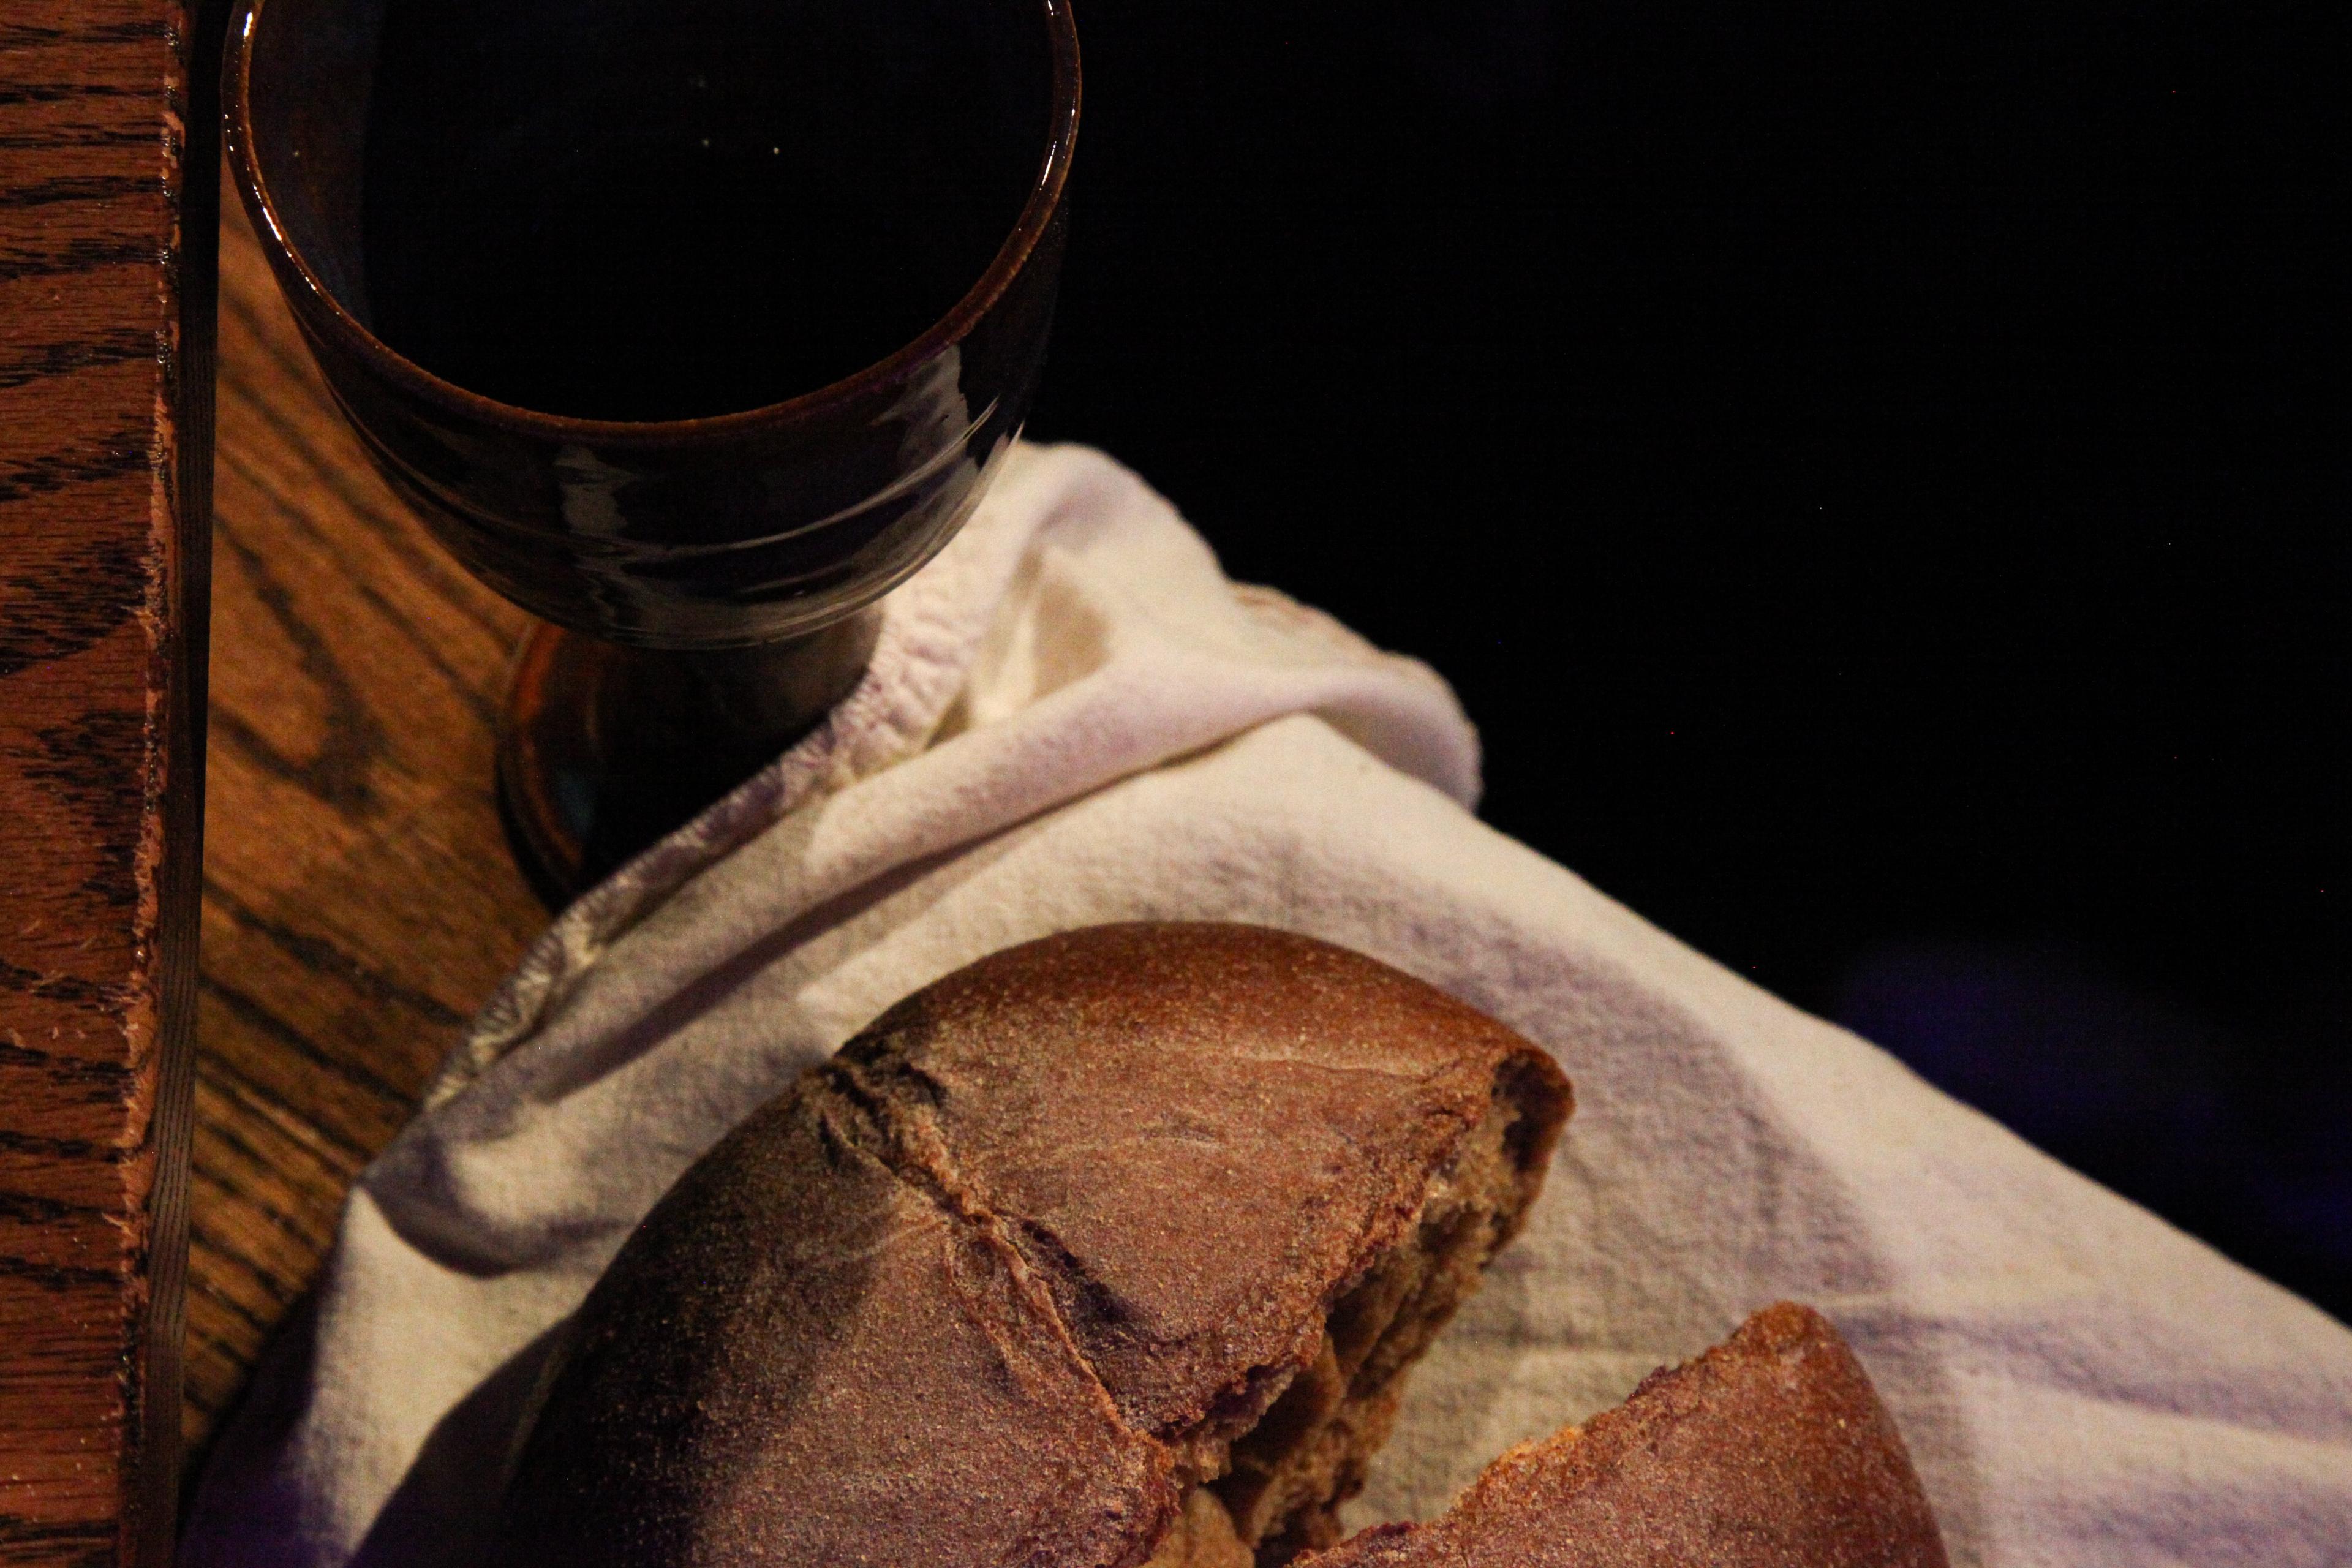 A loaf of bread and goblet of juice for communion at church.